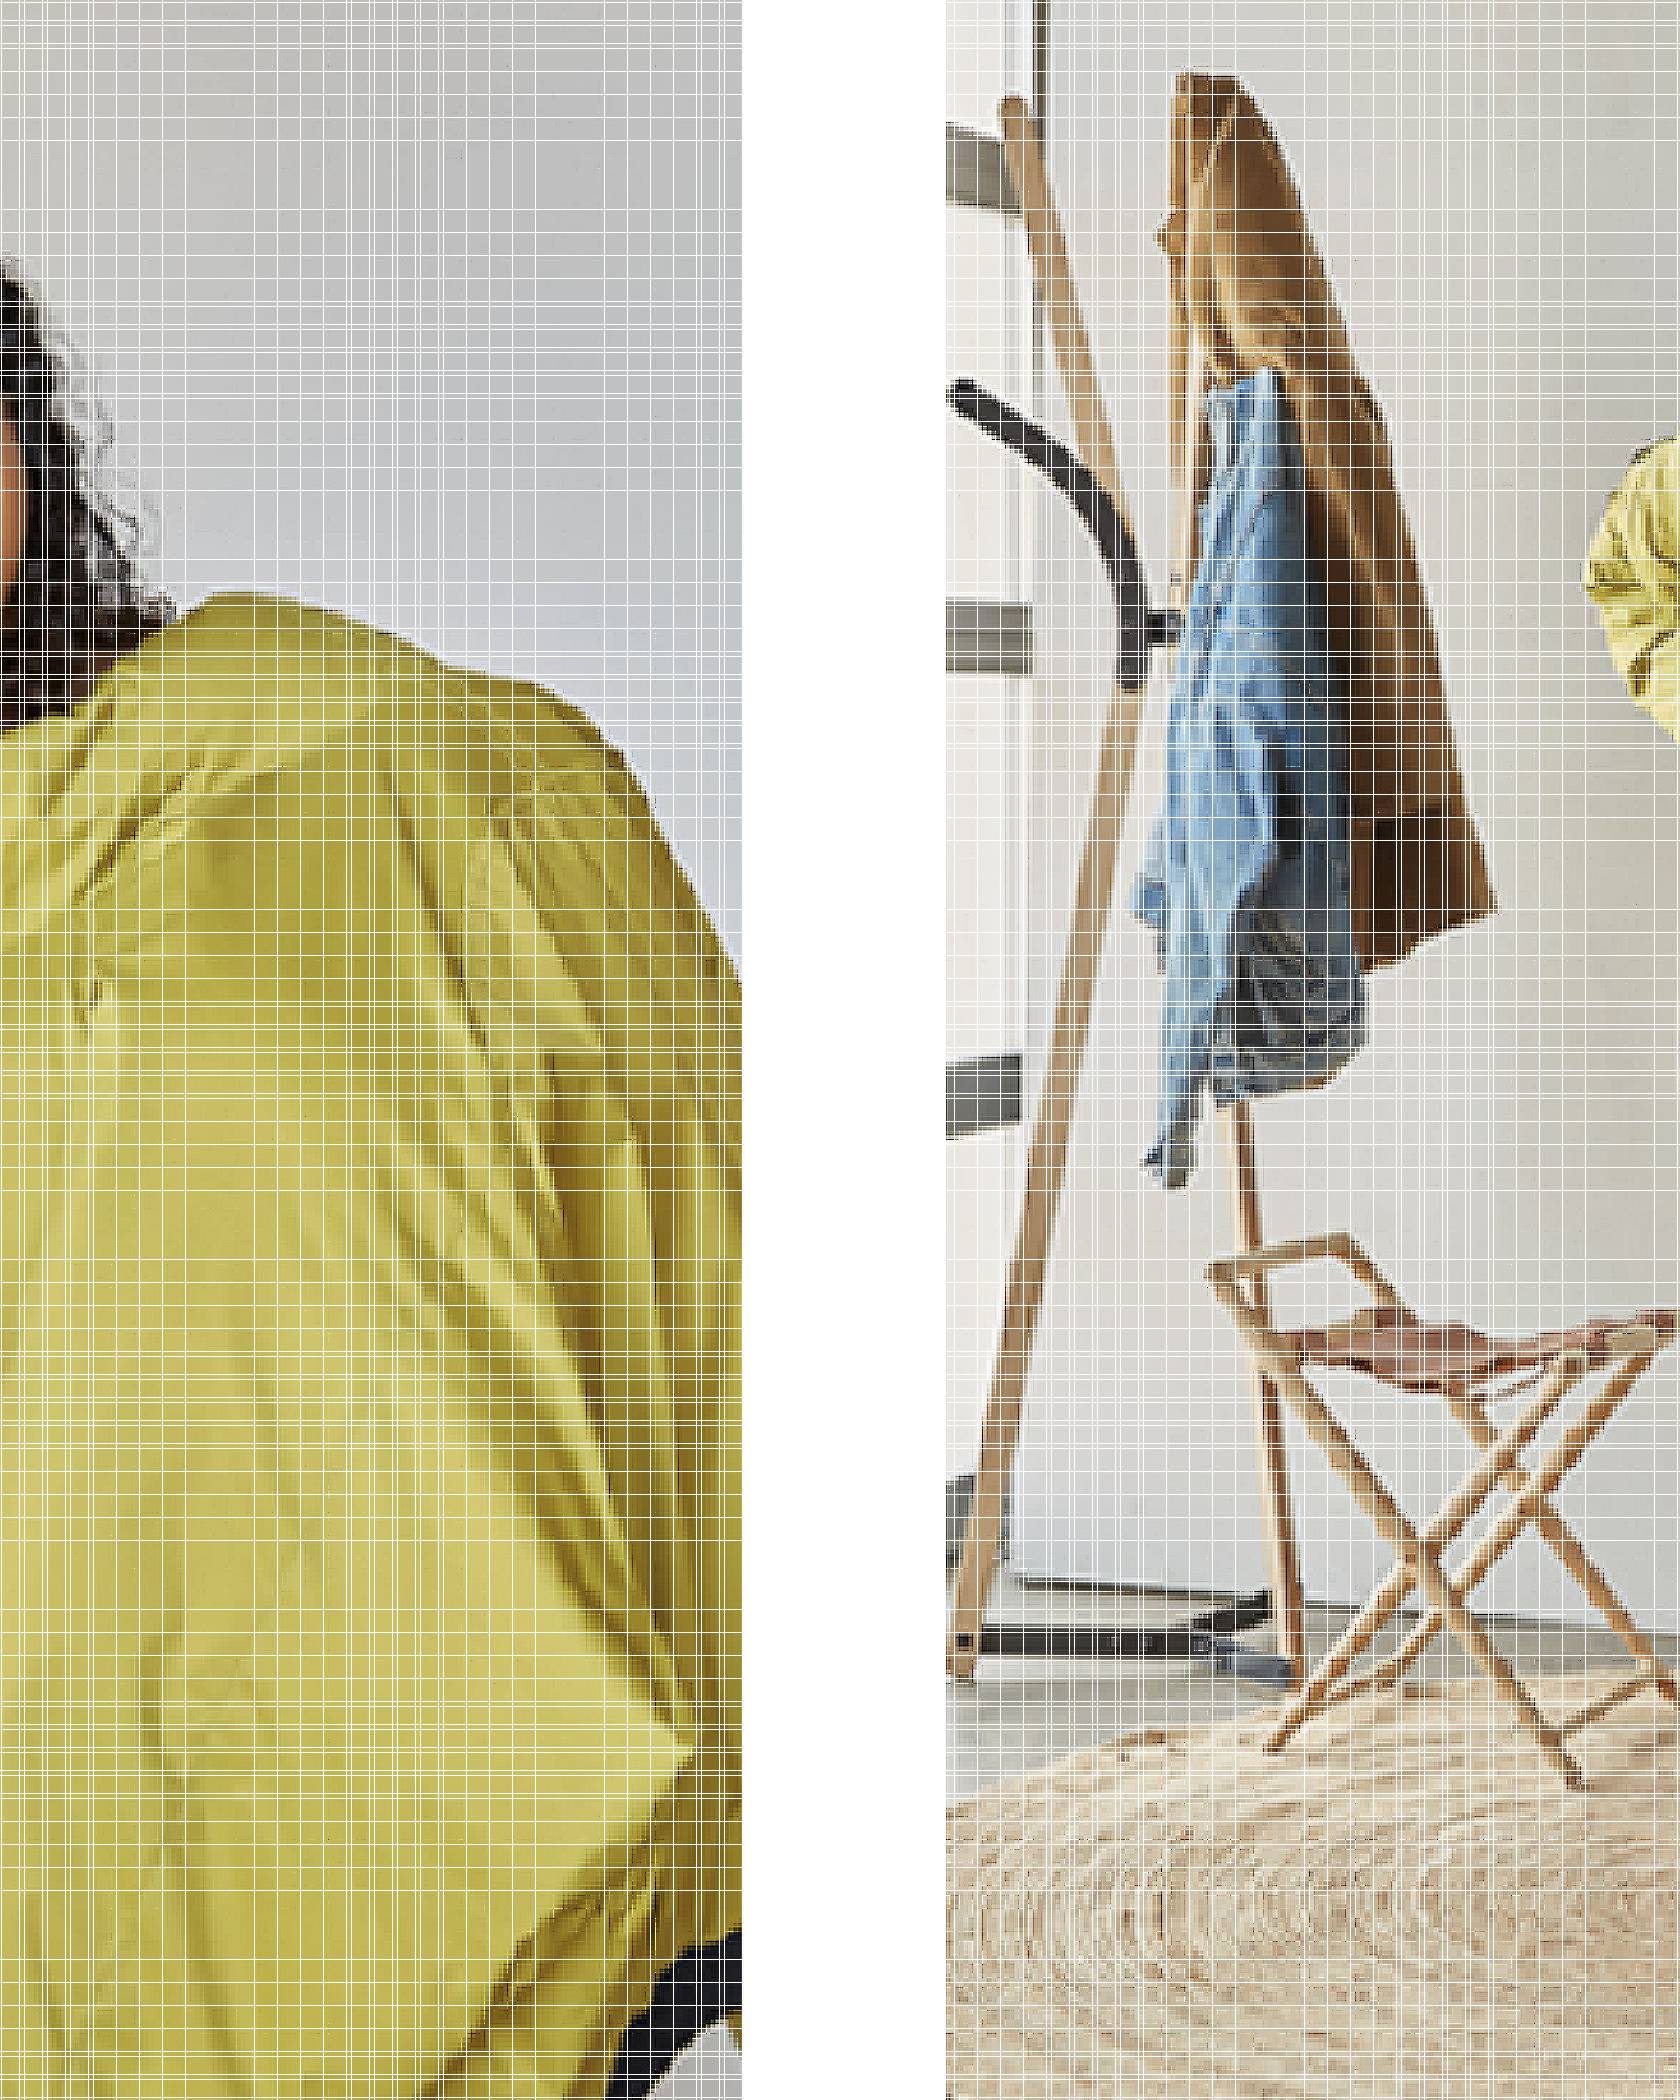 Two images of Levi's® employee, Amber - the left image is of Amber wearing a striped tee shirt, Wedgie Jeans, and a mustard colored jacket hanging on her left shoulder. The right image is of Amber wearing the same outfit of the left, standing next to a coat rack that has a denim jean jacket hanging on it.